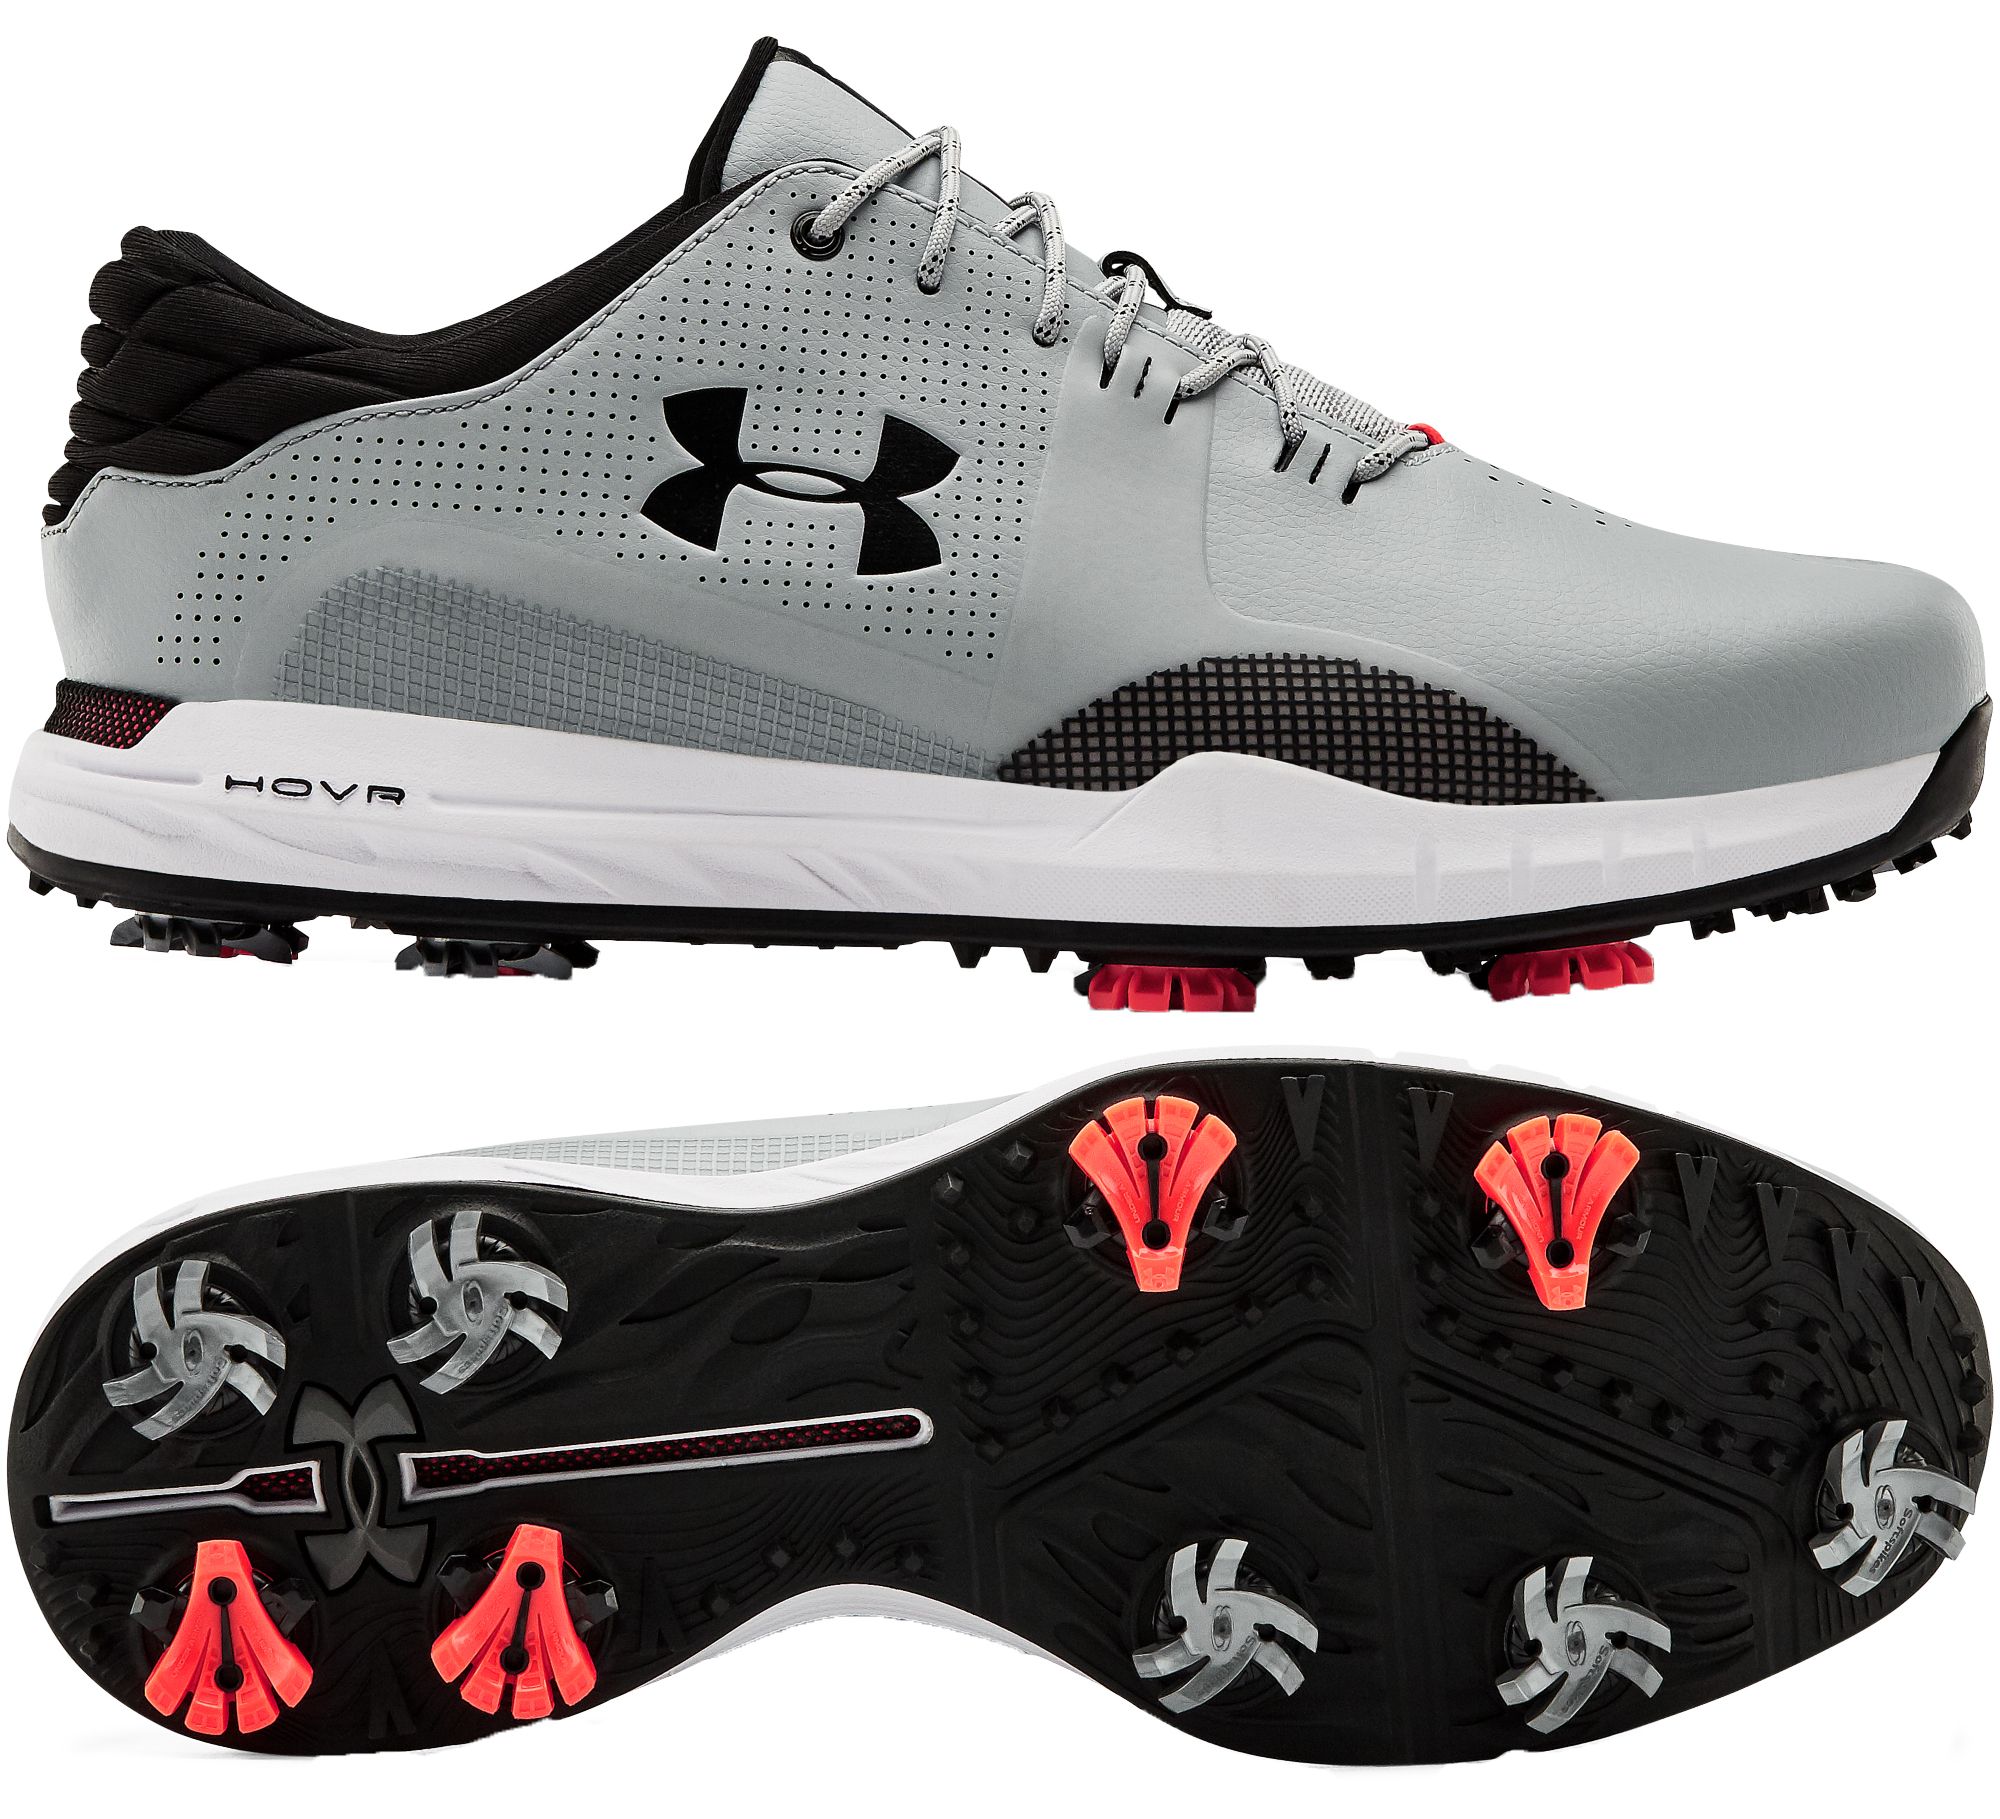 under armour shoes review